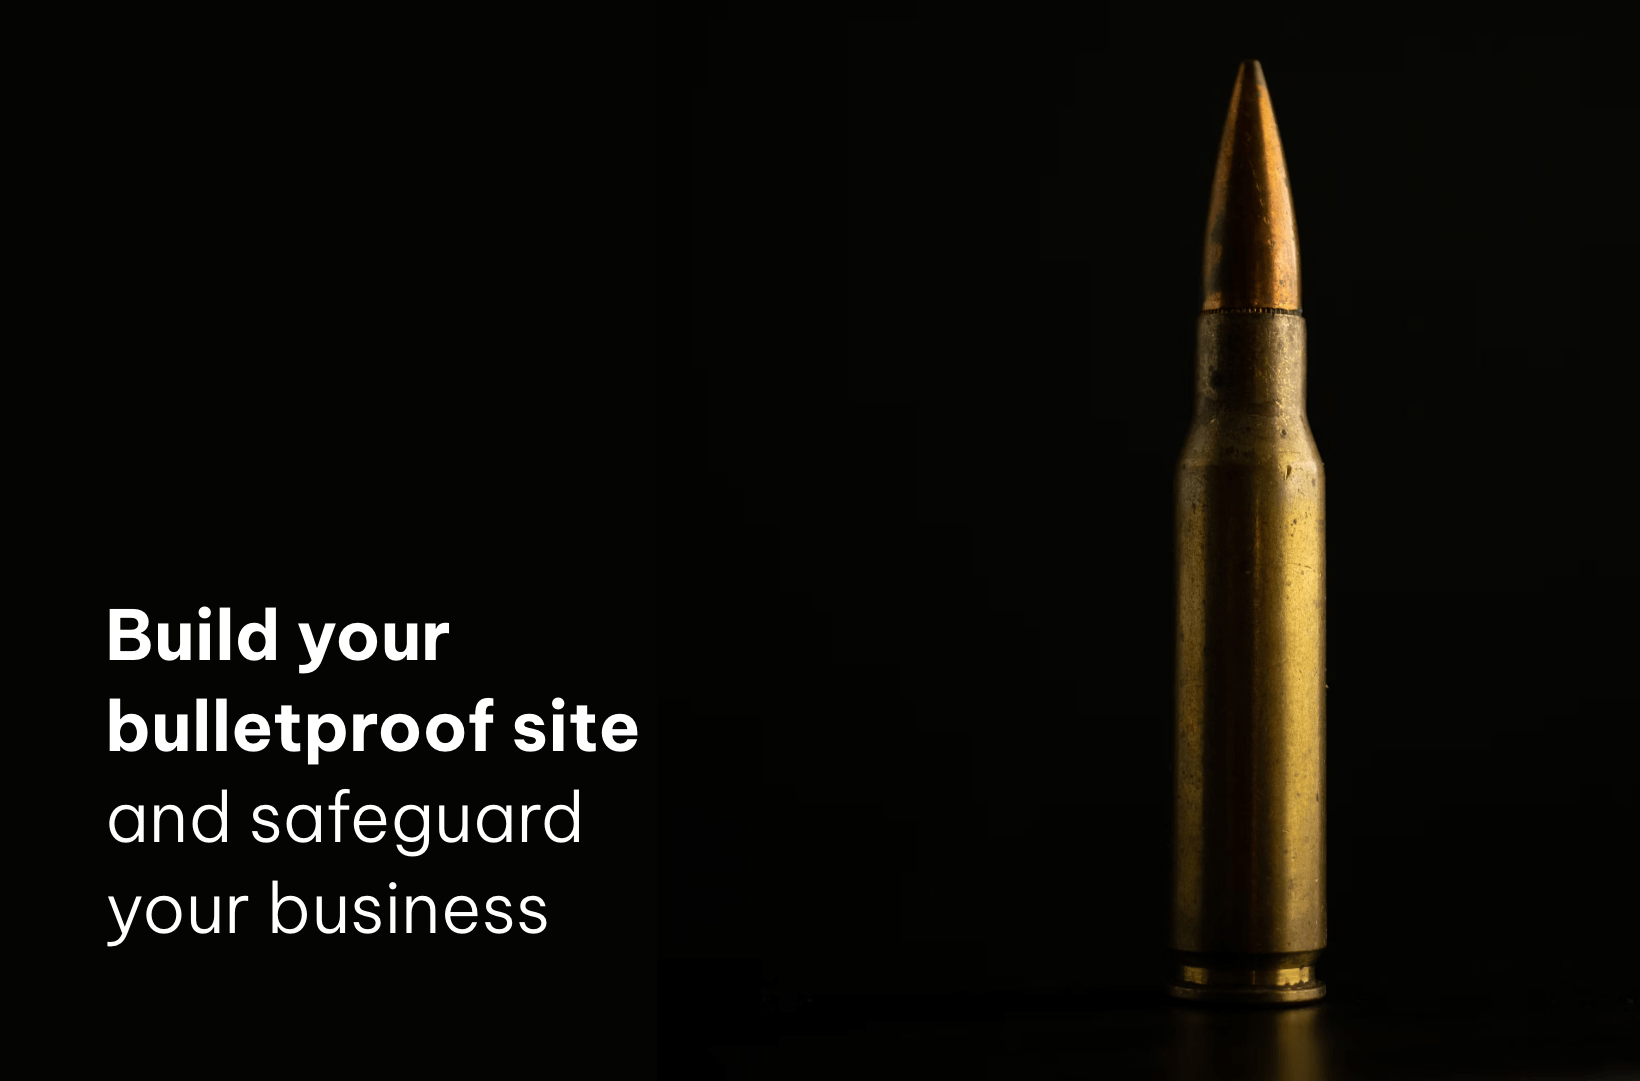 Build your bulletproof site and safeguard your business